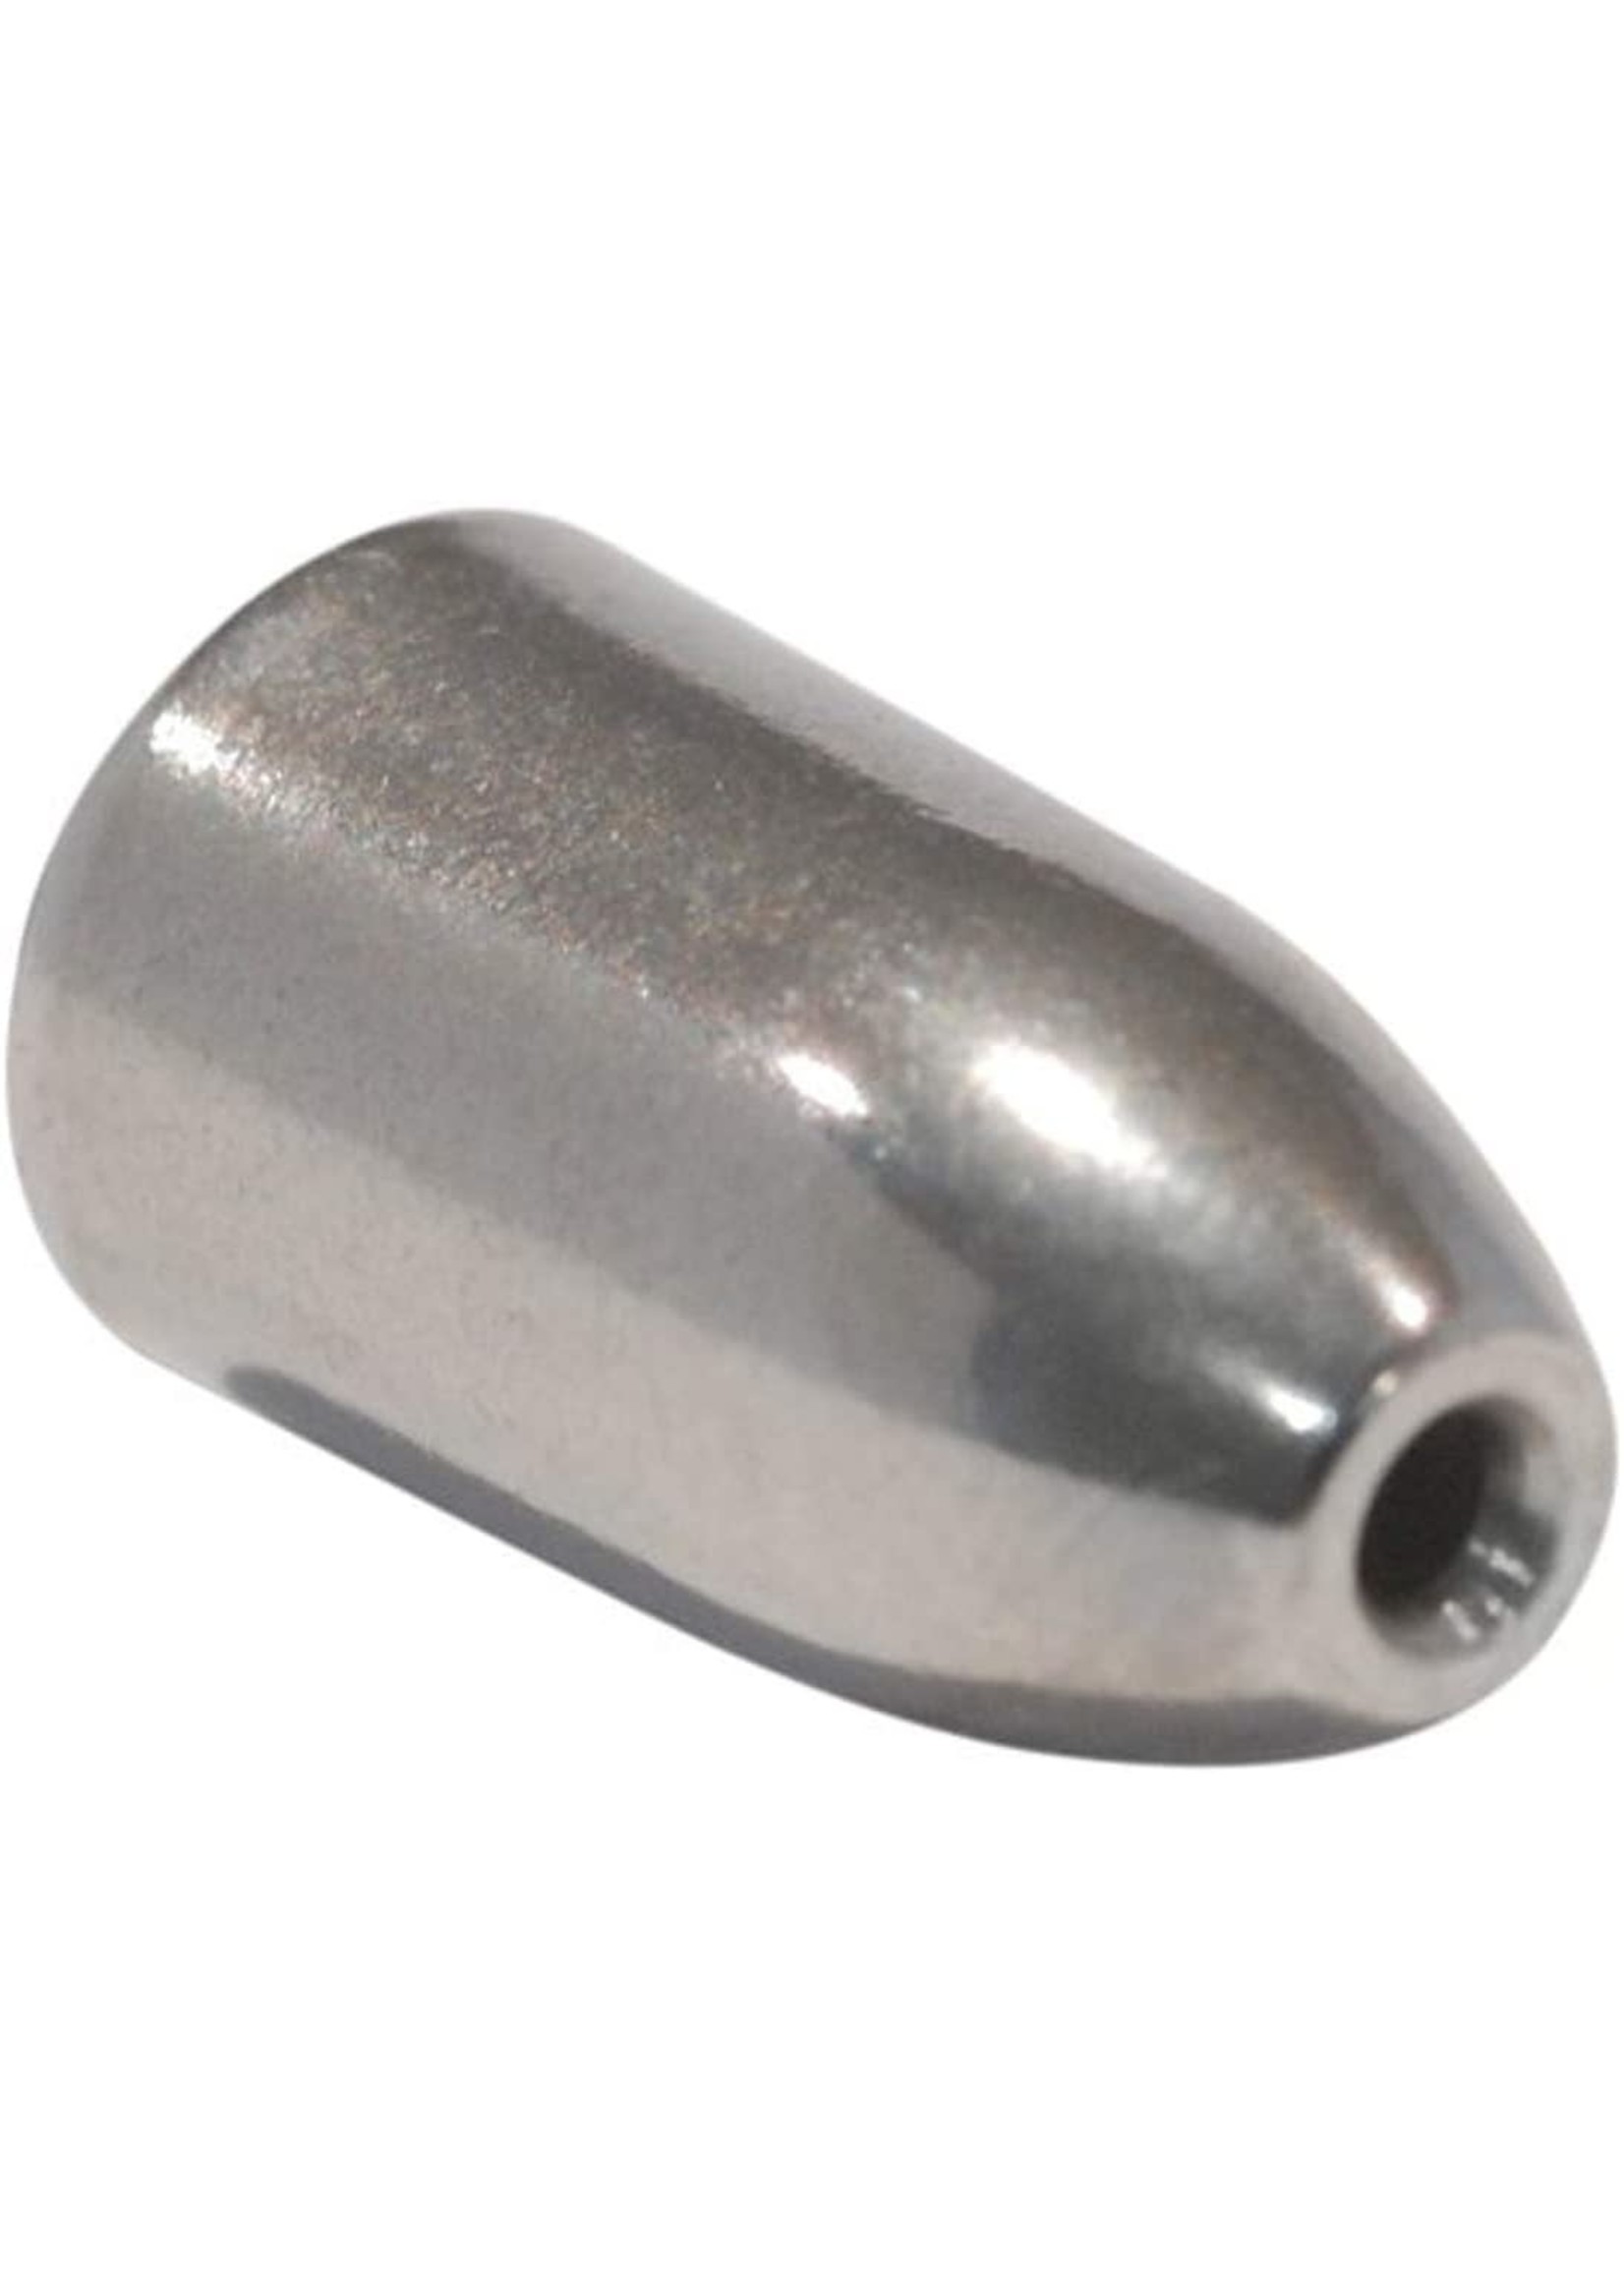 Bullet Weights Bullet Weight Fishing Sinkers - Tungsten Bullet 1/2oz